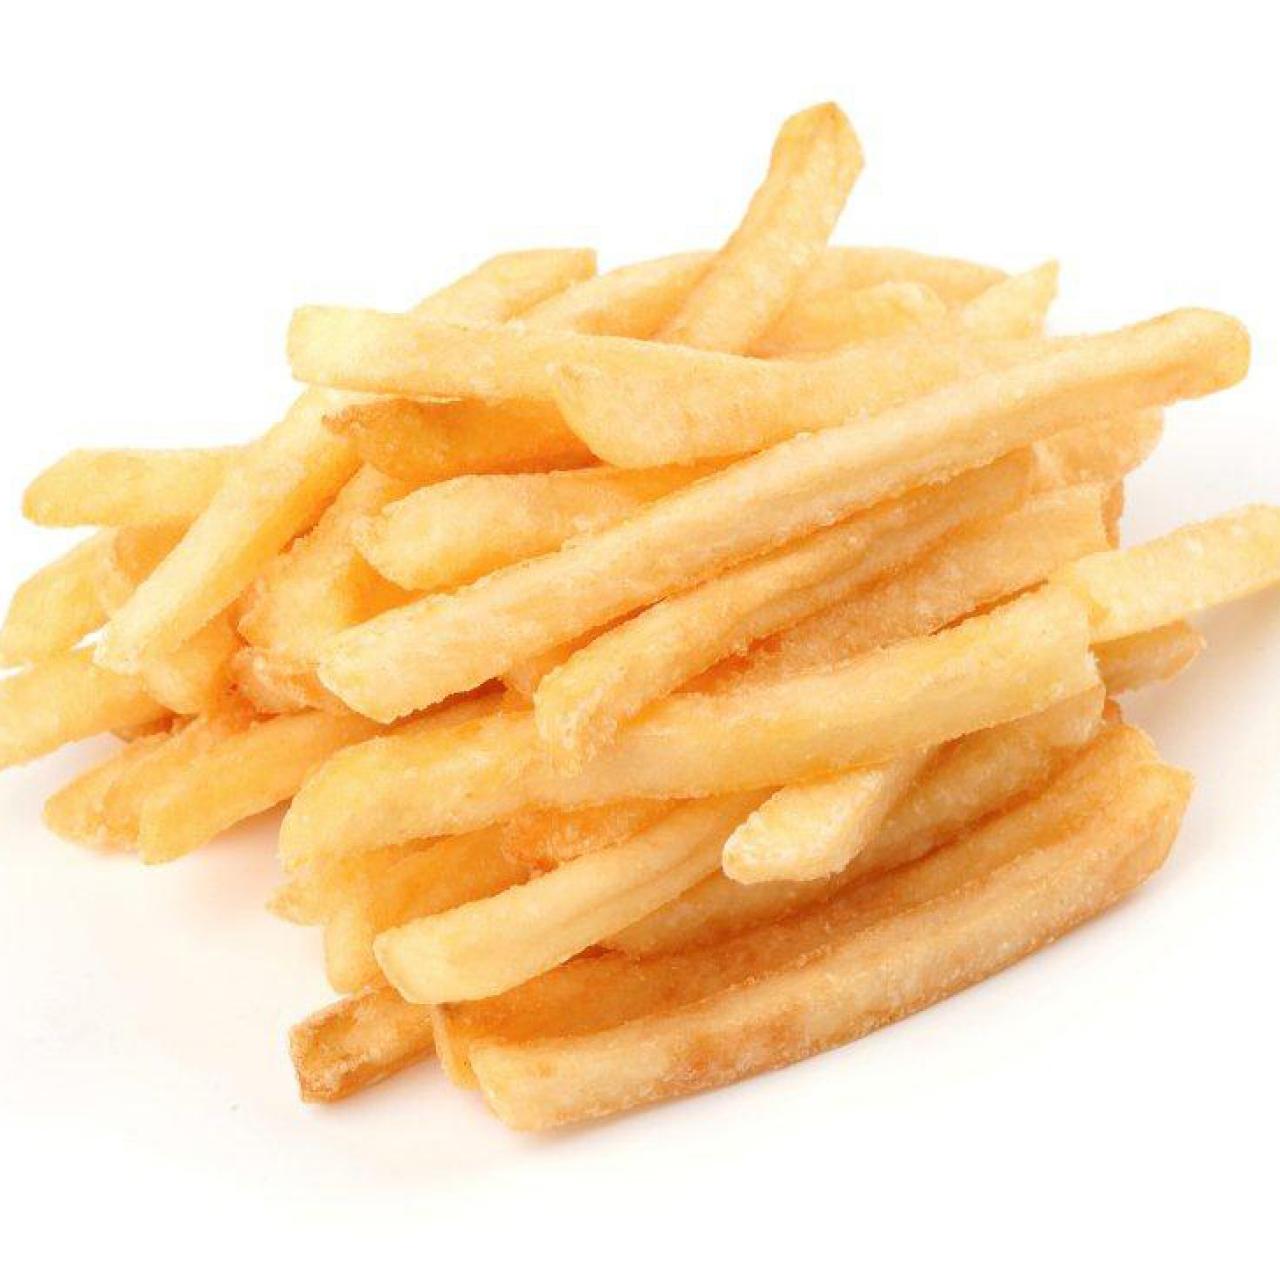 We Put 5 Frozen Fries to the Test to Find the Crispiest